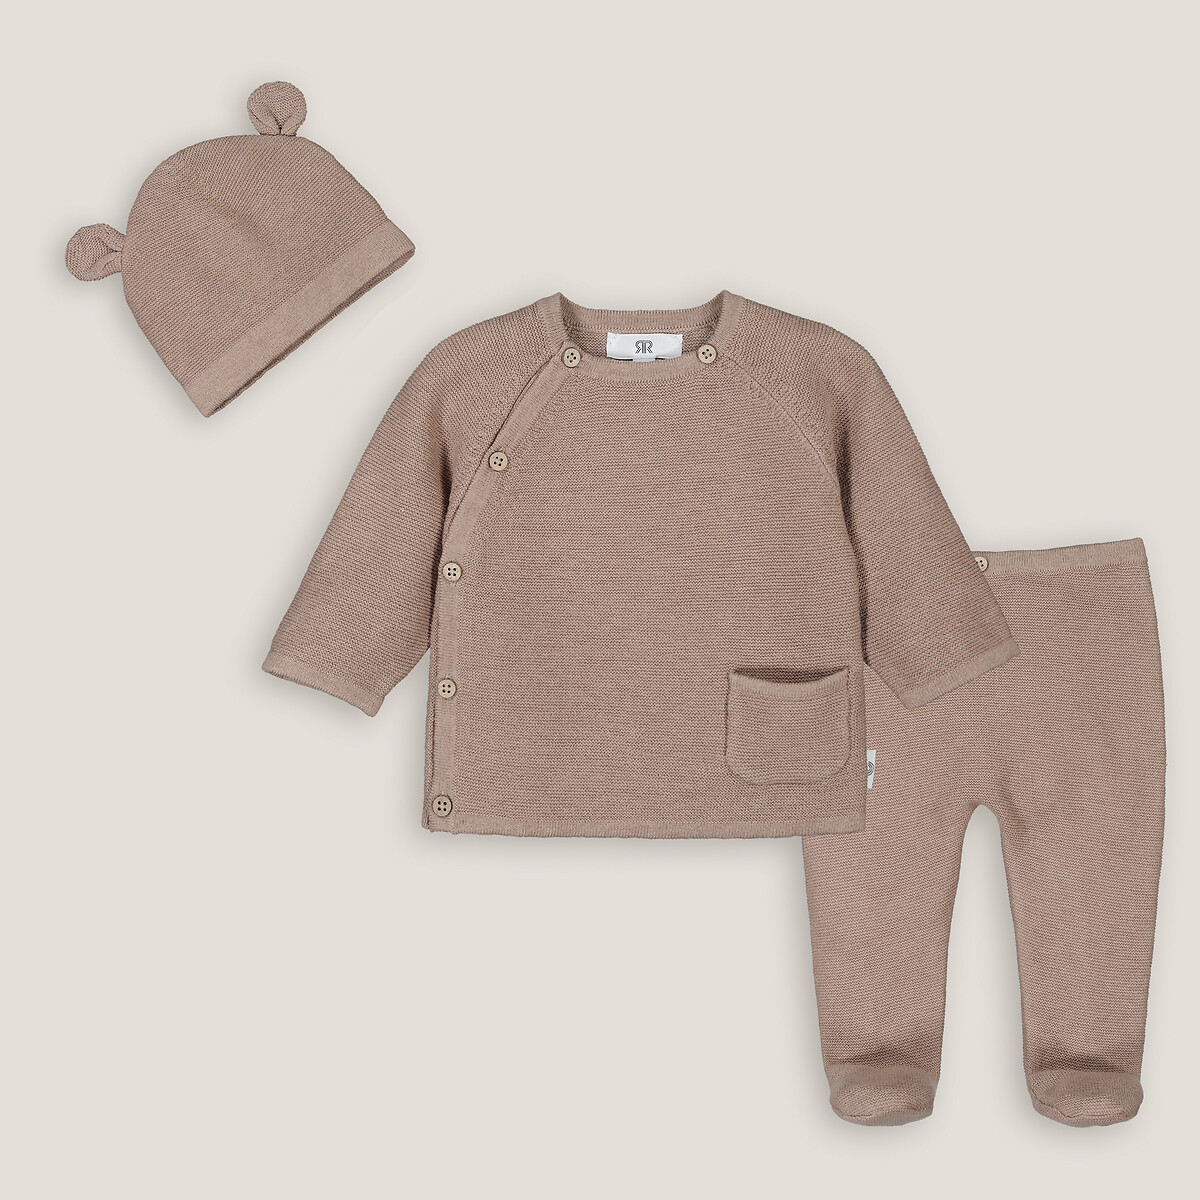 Cotton/Wool 3-Piece Outfit